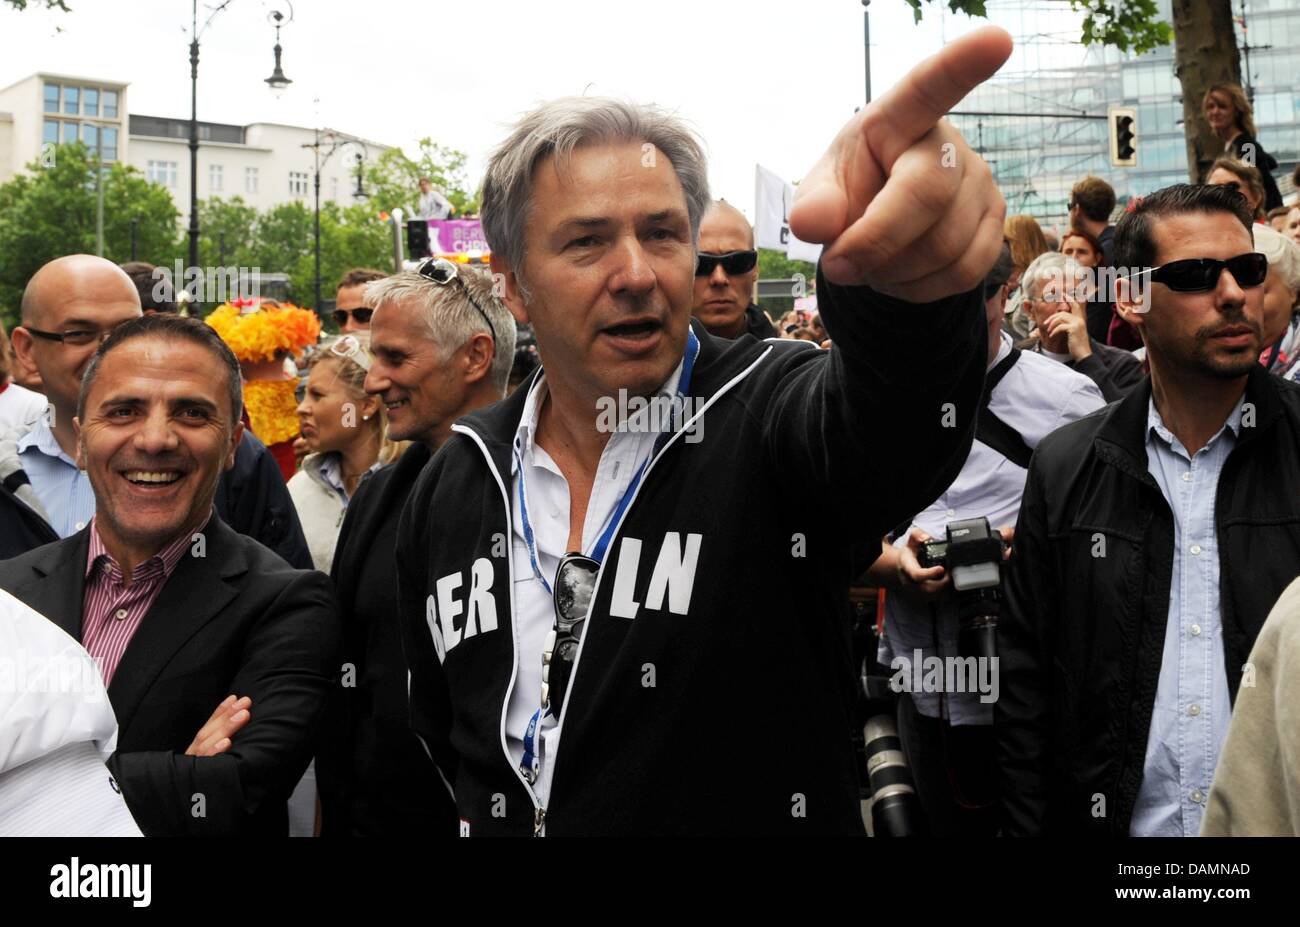 The Governing Mayor of Berlin Klaus Wowereit (M) attends the Christopher Street Day (CSD) parade in Berlin, Germany, 25 June 2011. Each year at the CSD, homosexual men and women remember the police's brutal attack on homosexuals in New York in 1969. Photo: Maurizio Gambarini Stock Photo